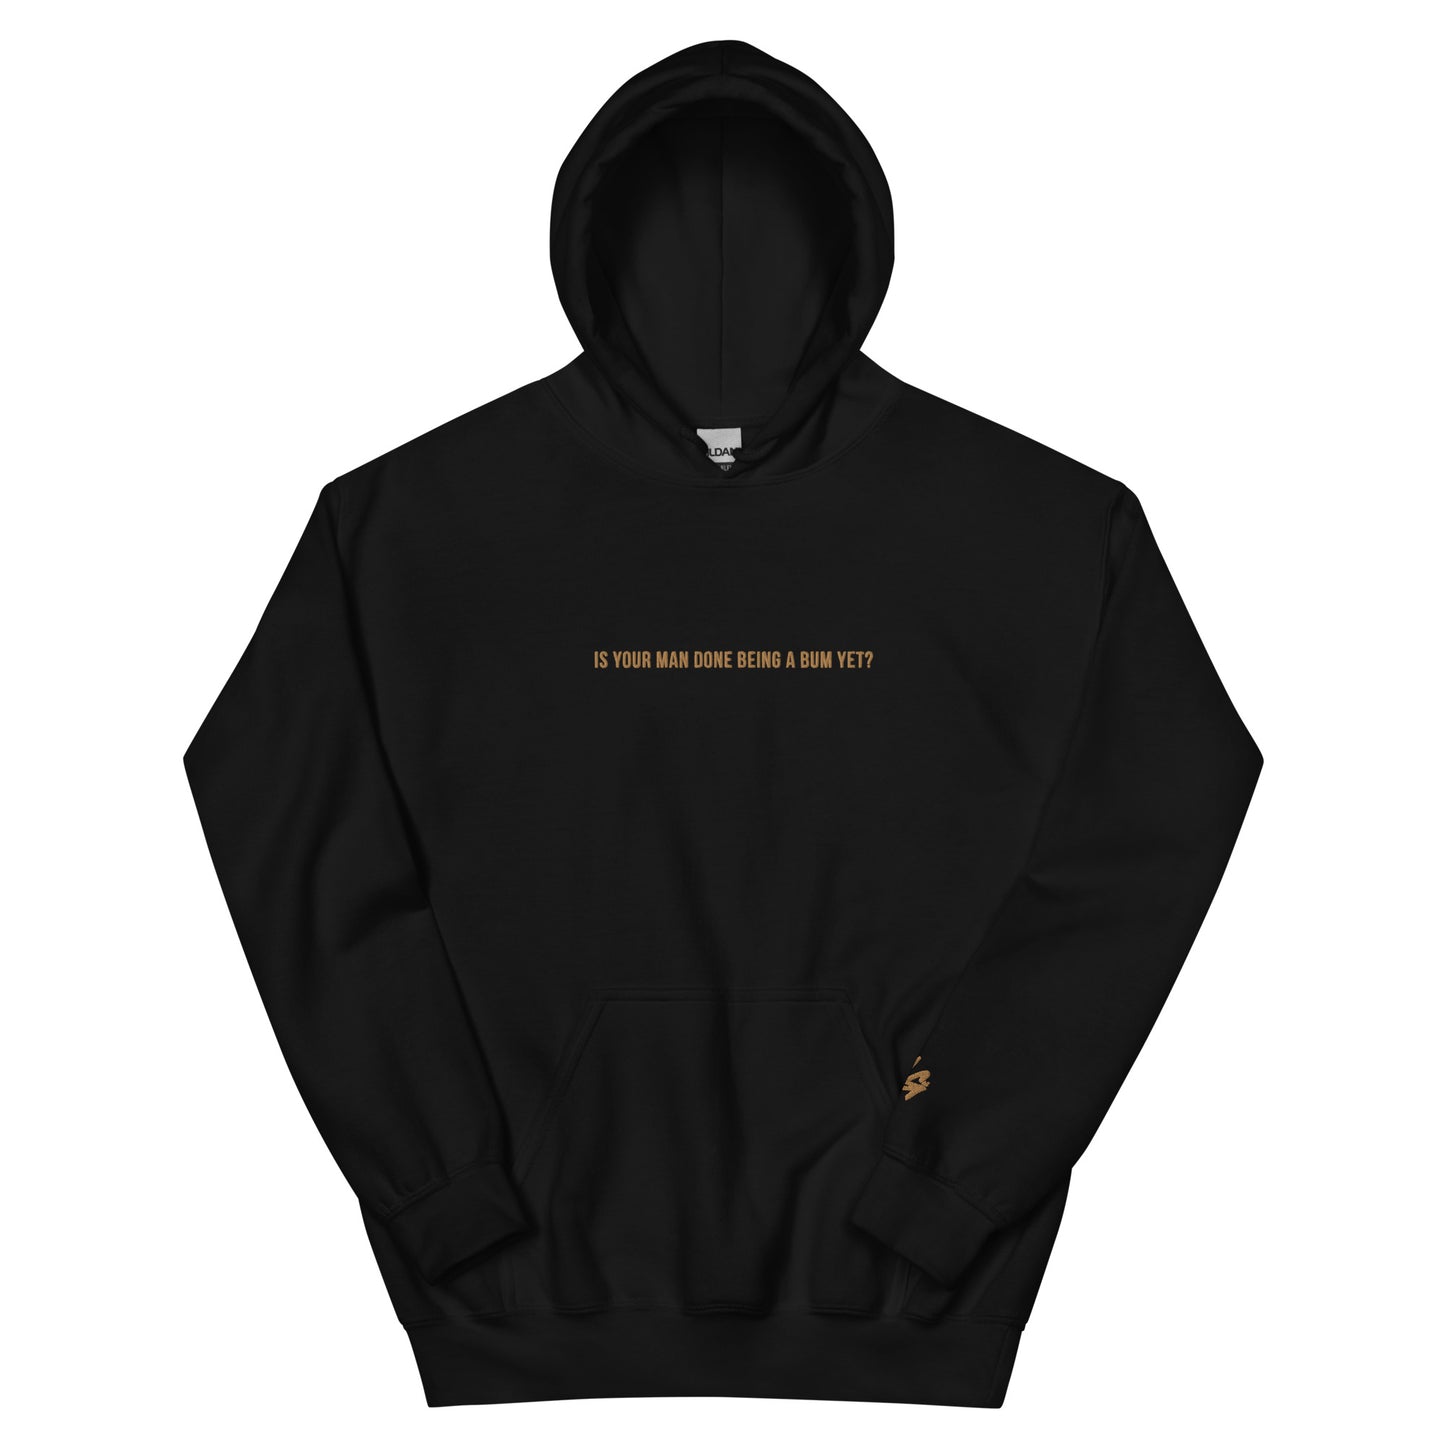 "Is Your Man Done Being A Bum Yet?" Hoodie